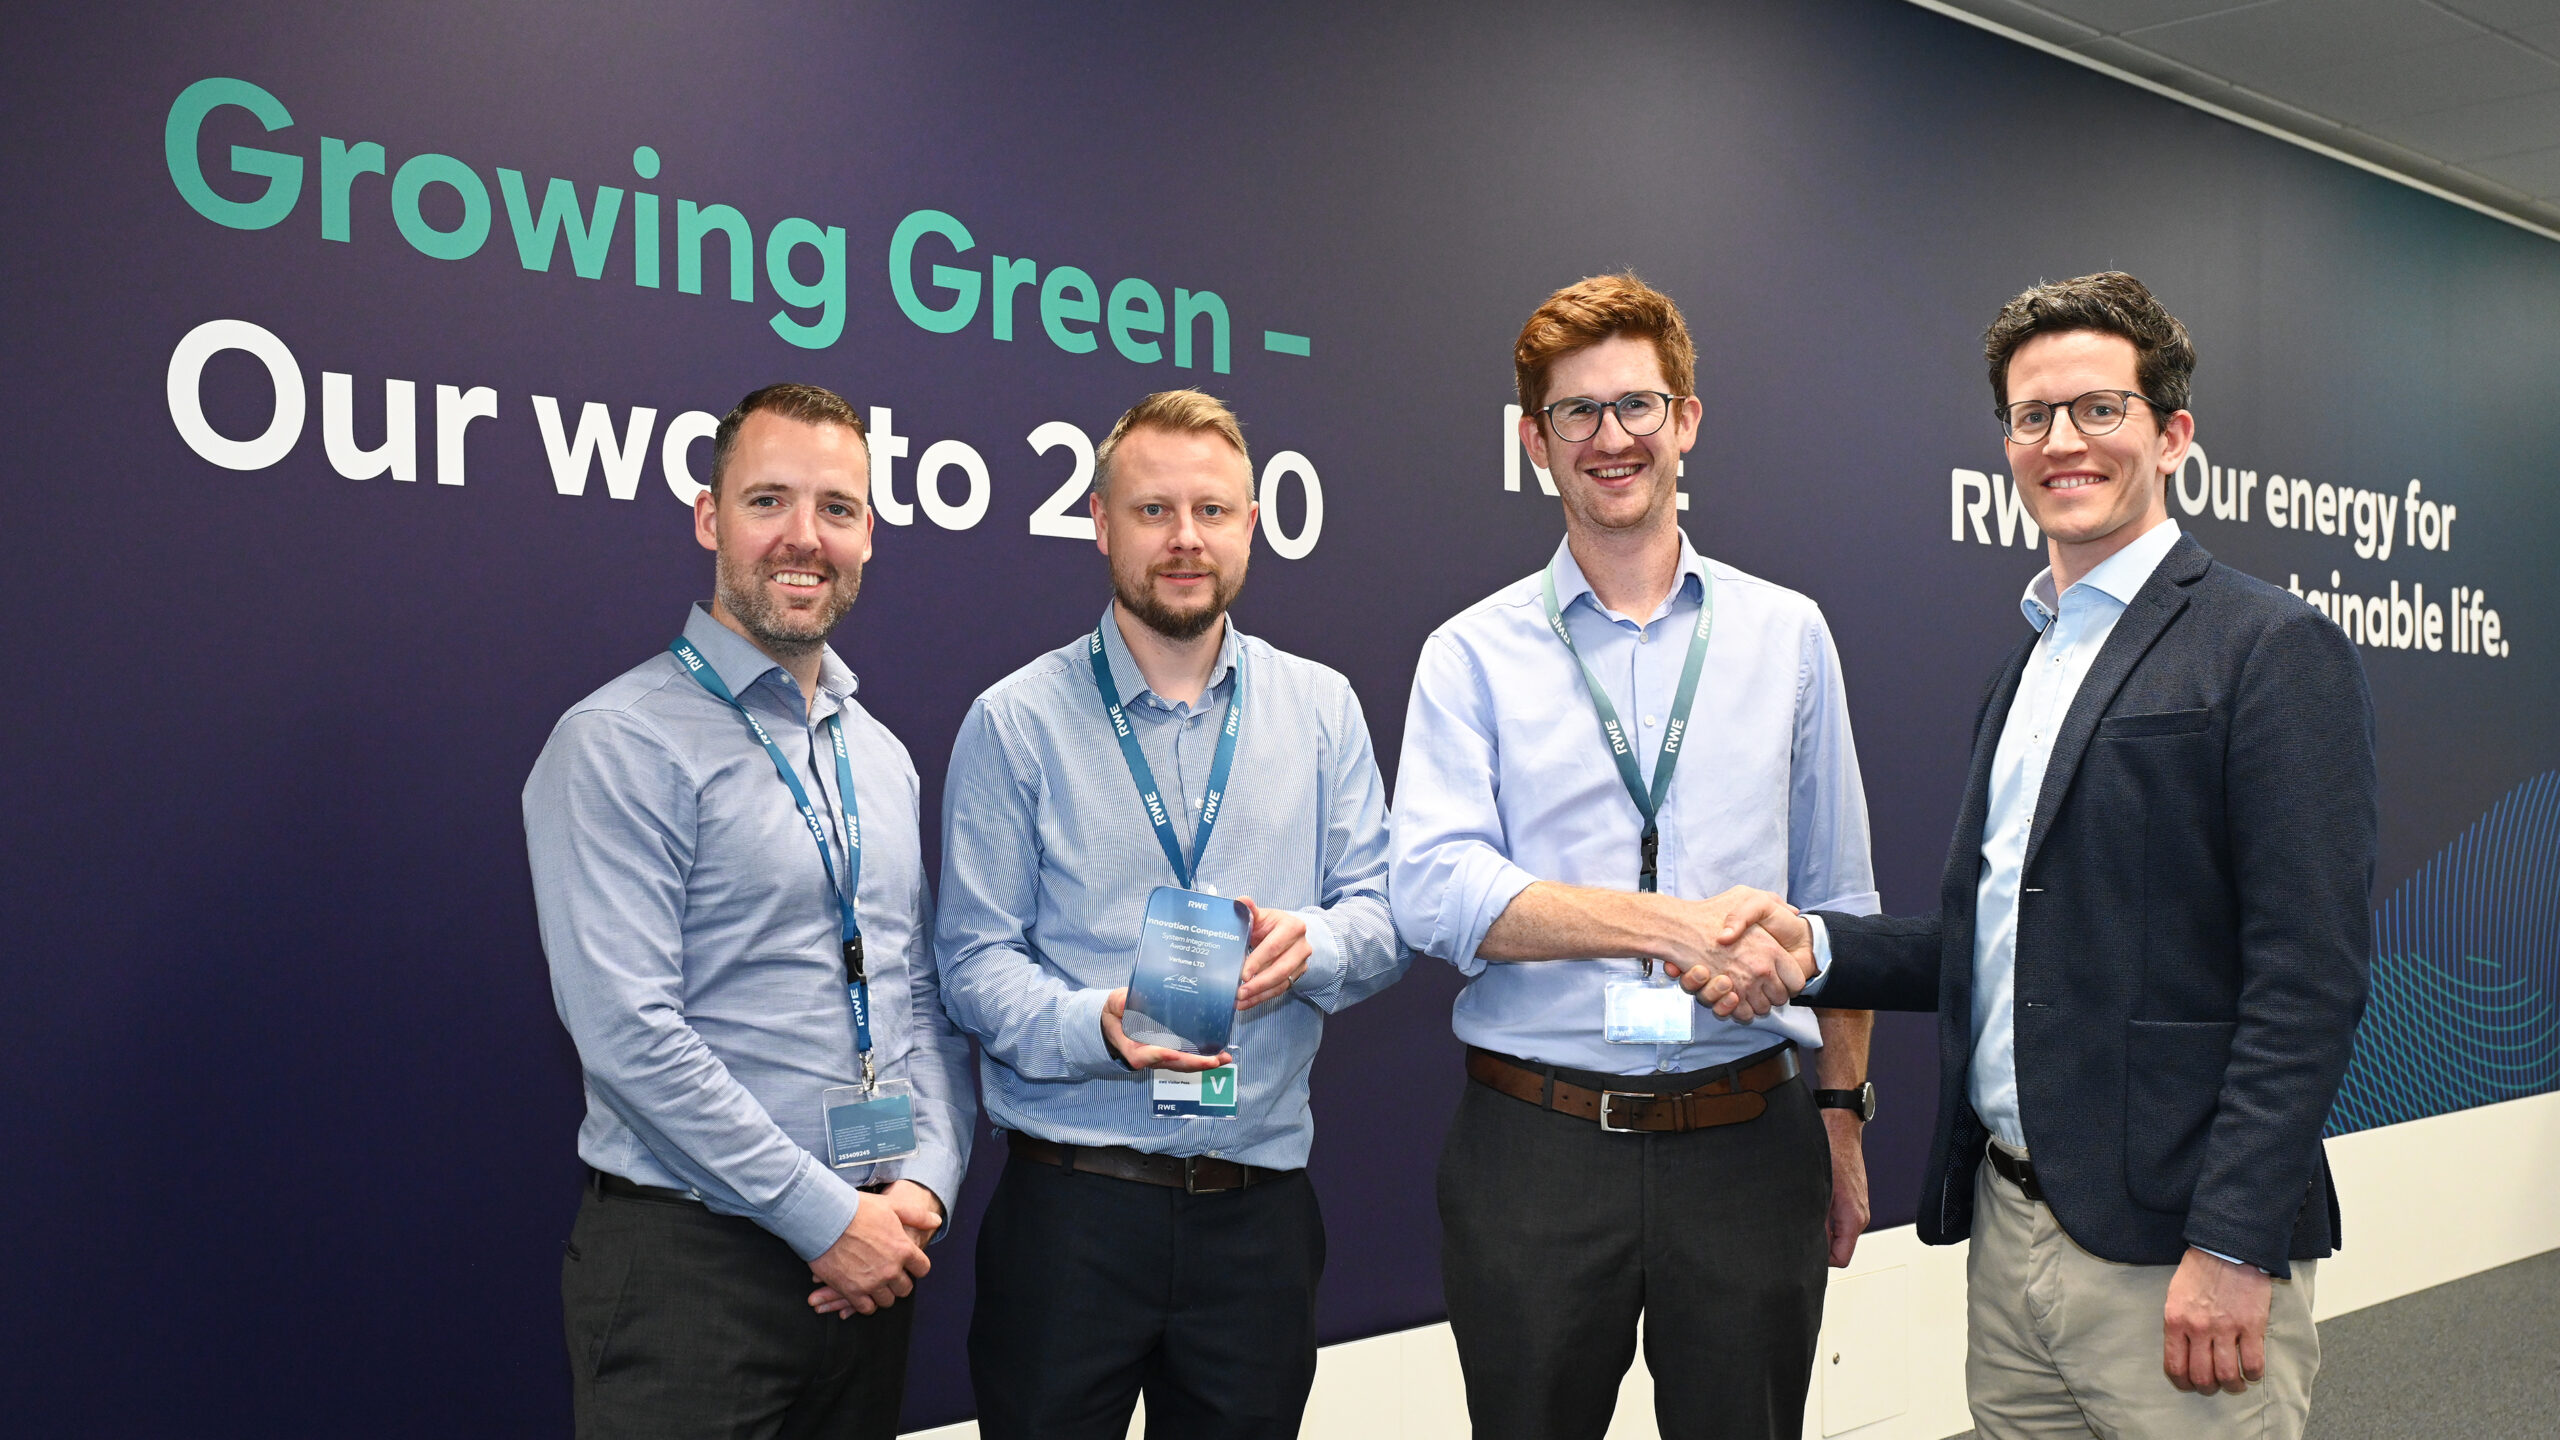 MEMBER NEWS: RWE announces winners of Innovation Competition on Ecology and System Integration of offshore wind